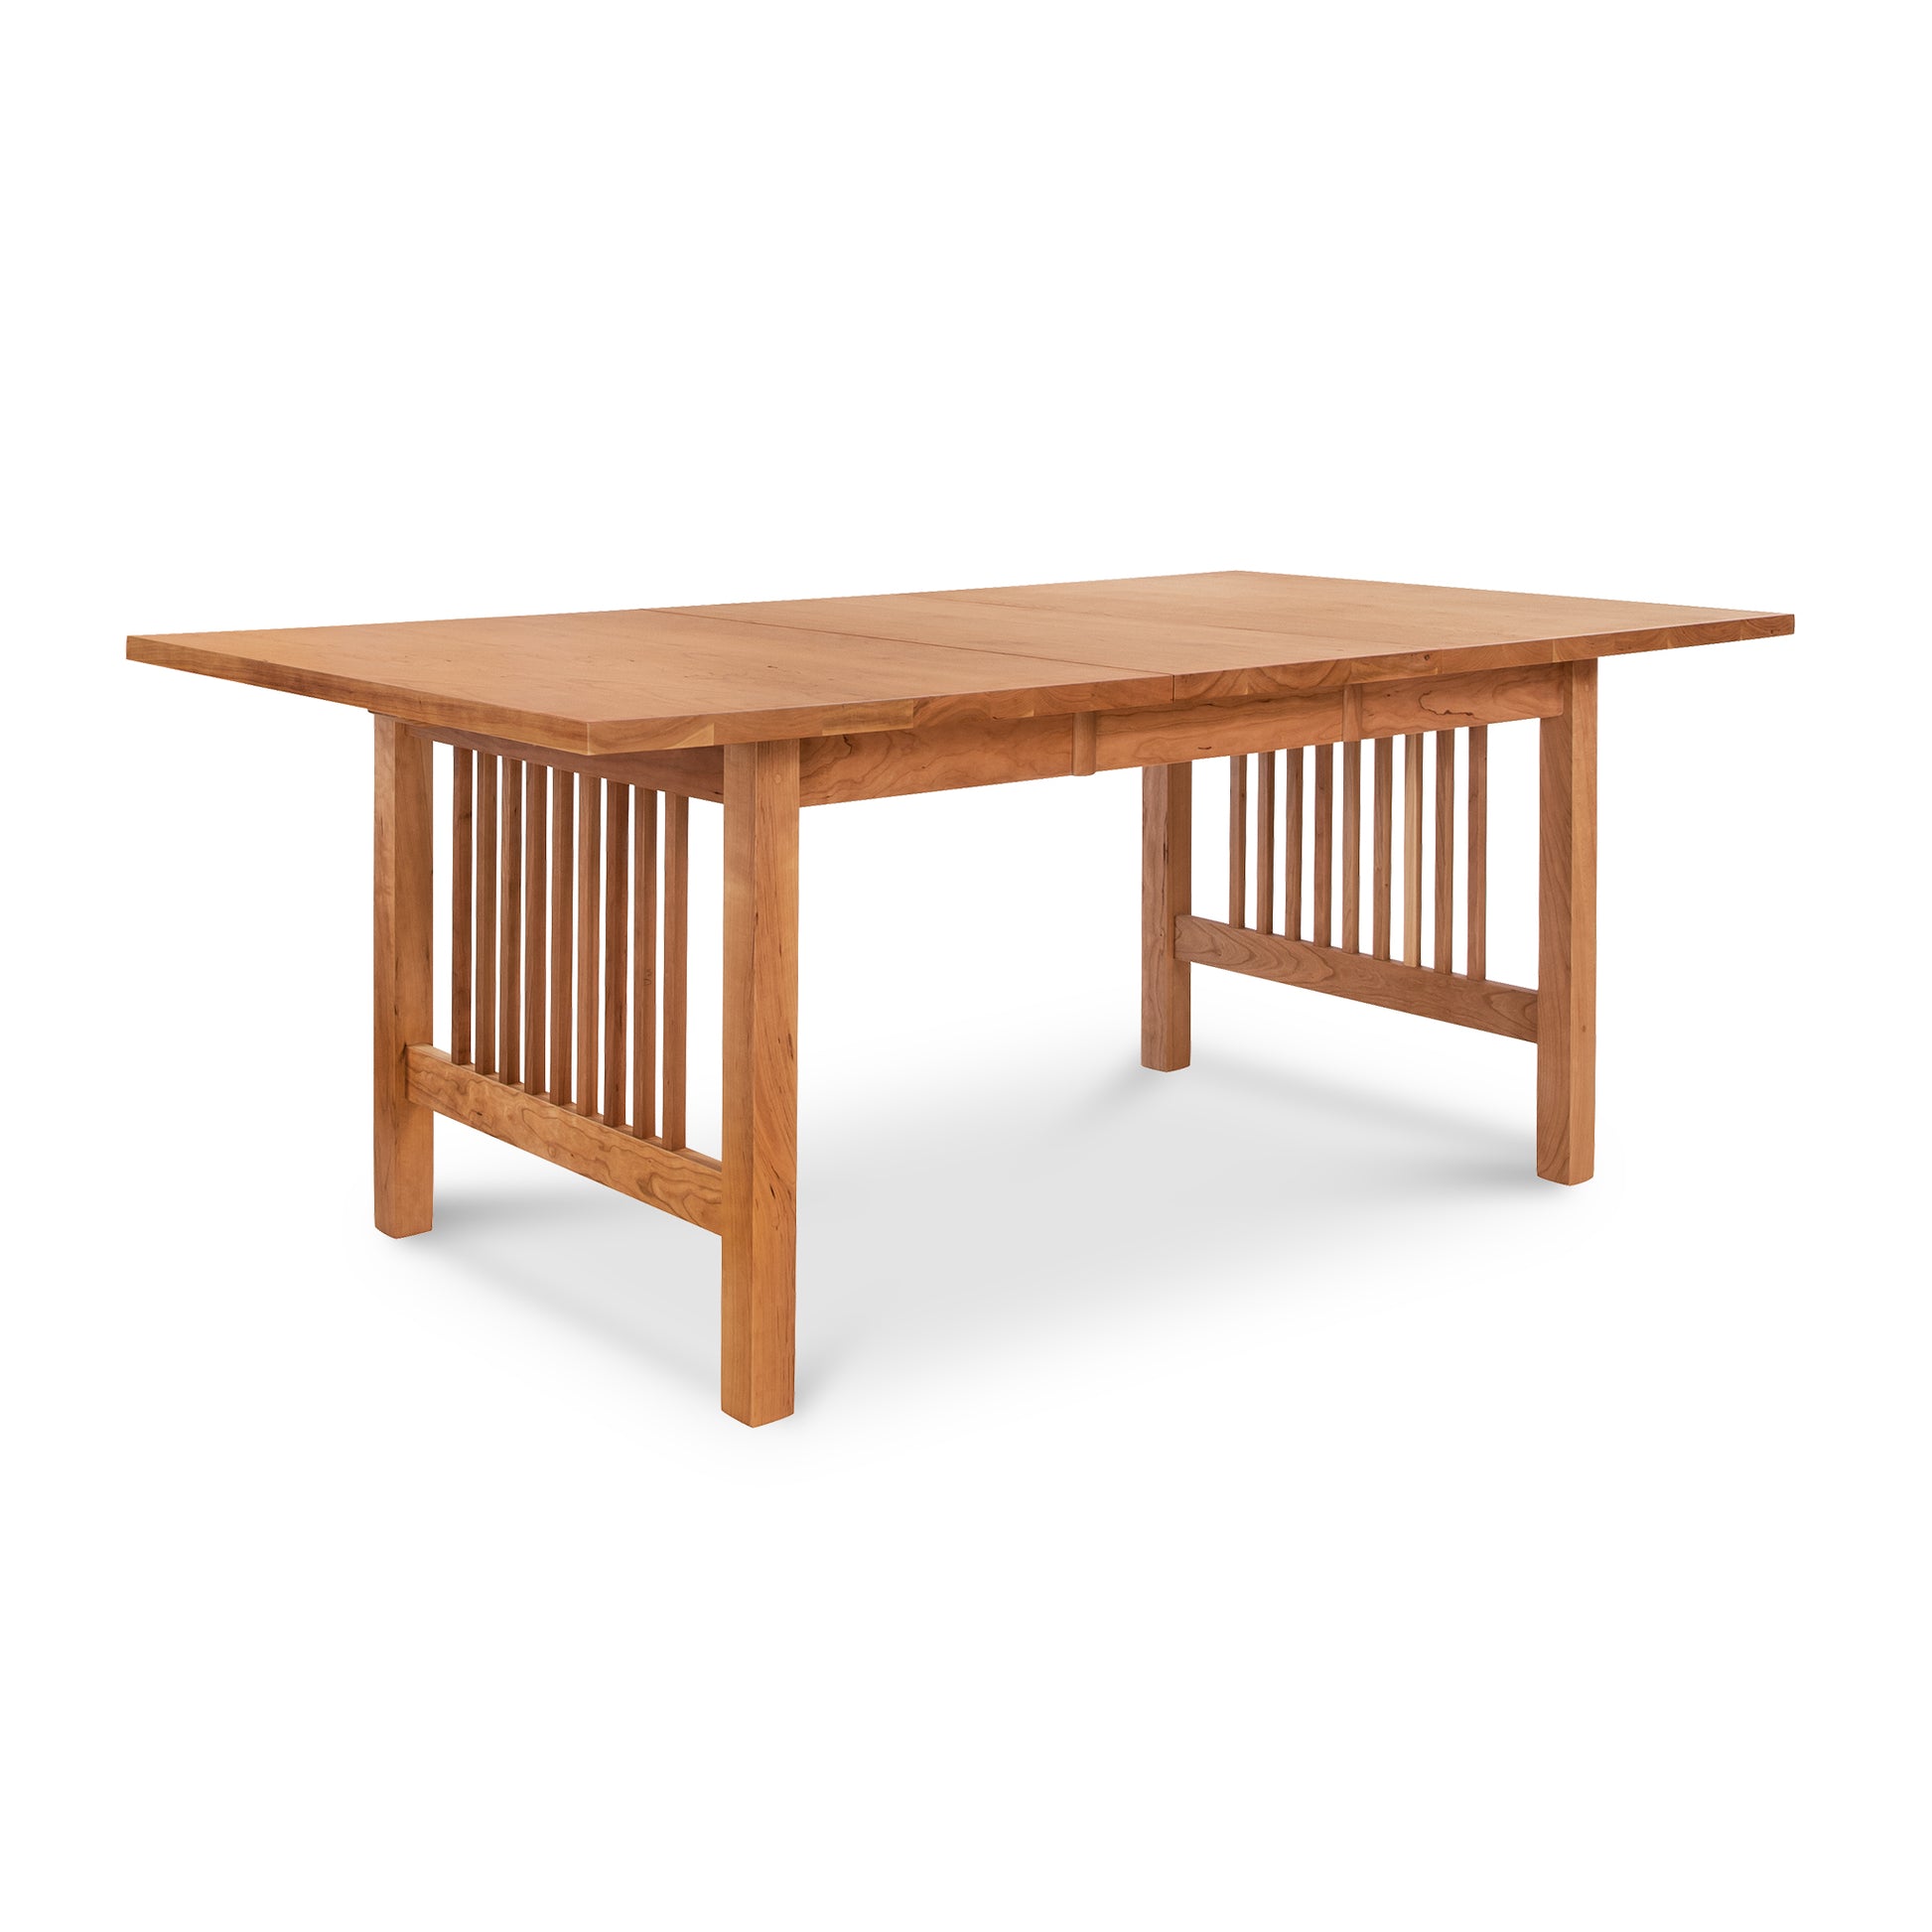 An American Mission Extension Dining Table by Lyndon Furniture with a solid natural wood construction and an extension feature.